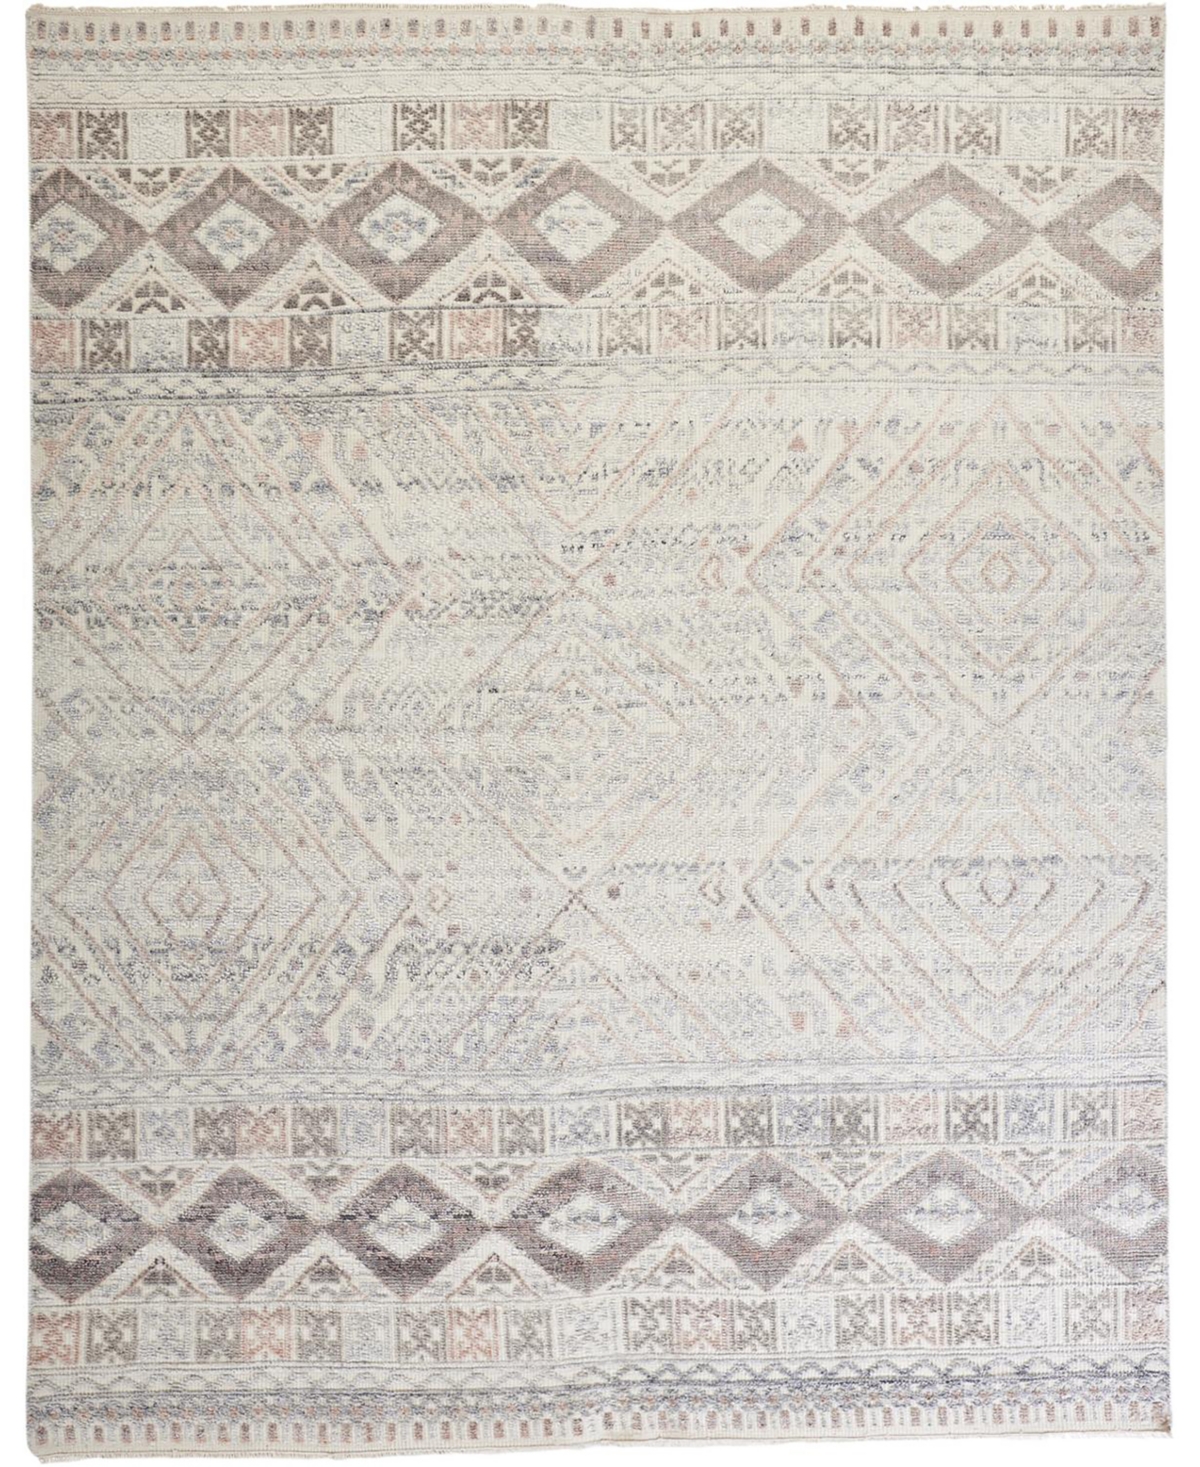 Feizy Esther EST6495 7'9in x 9'9in Area Rug - Ivory, Pink